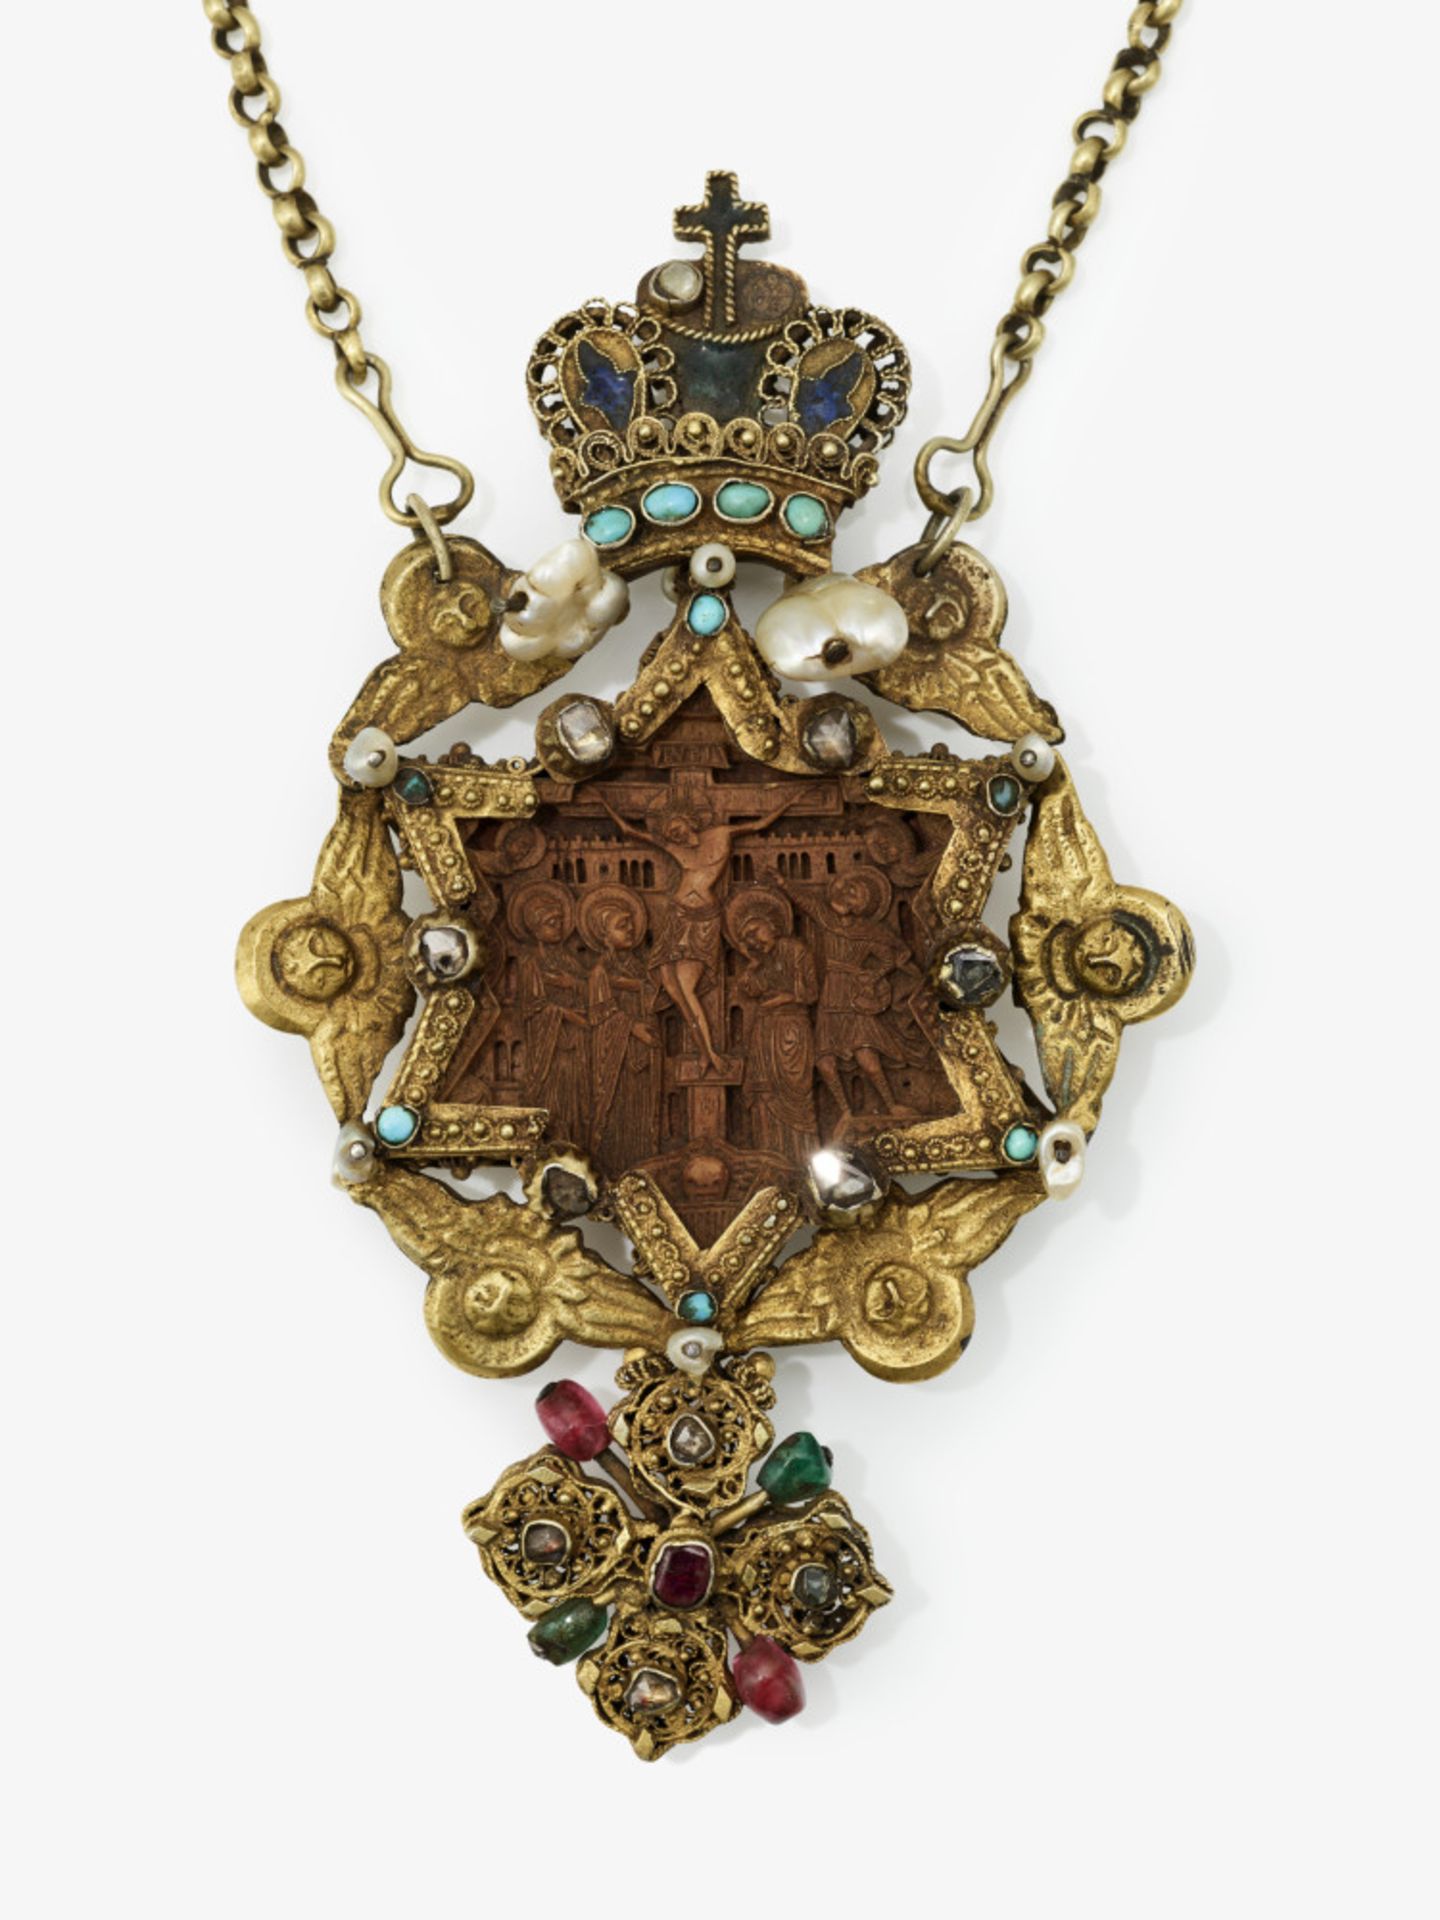 A pectoral pendant with necklace - Carving: probably Berg Athos, 18th century  - Image 3 of 7